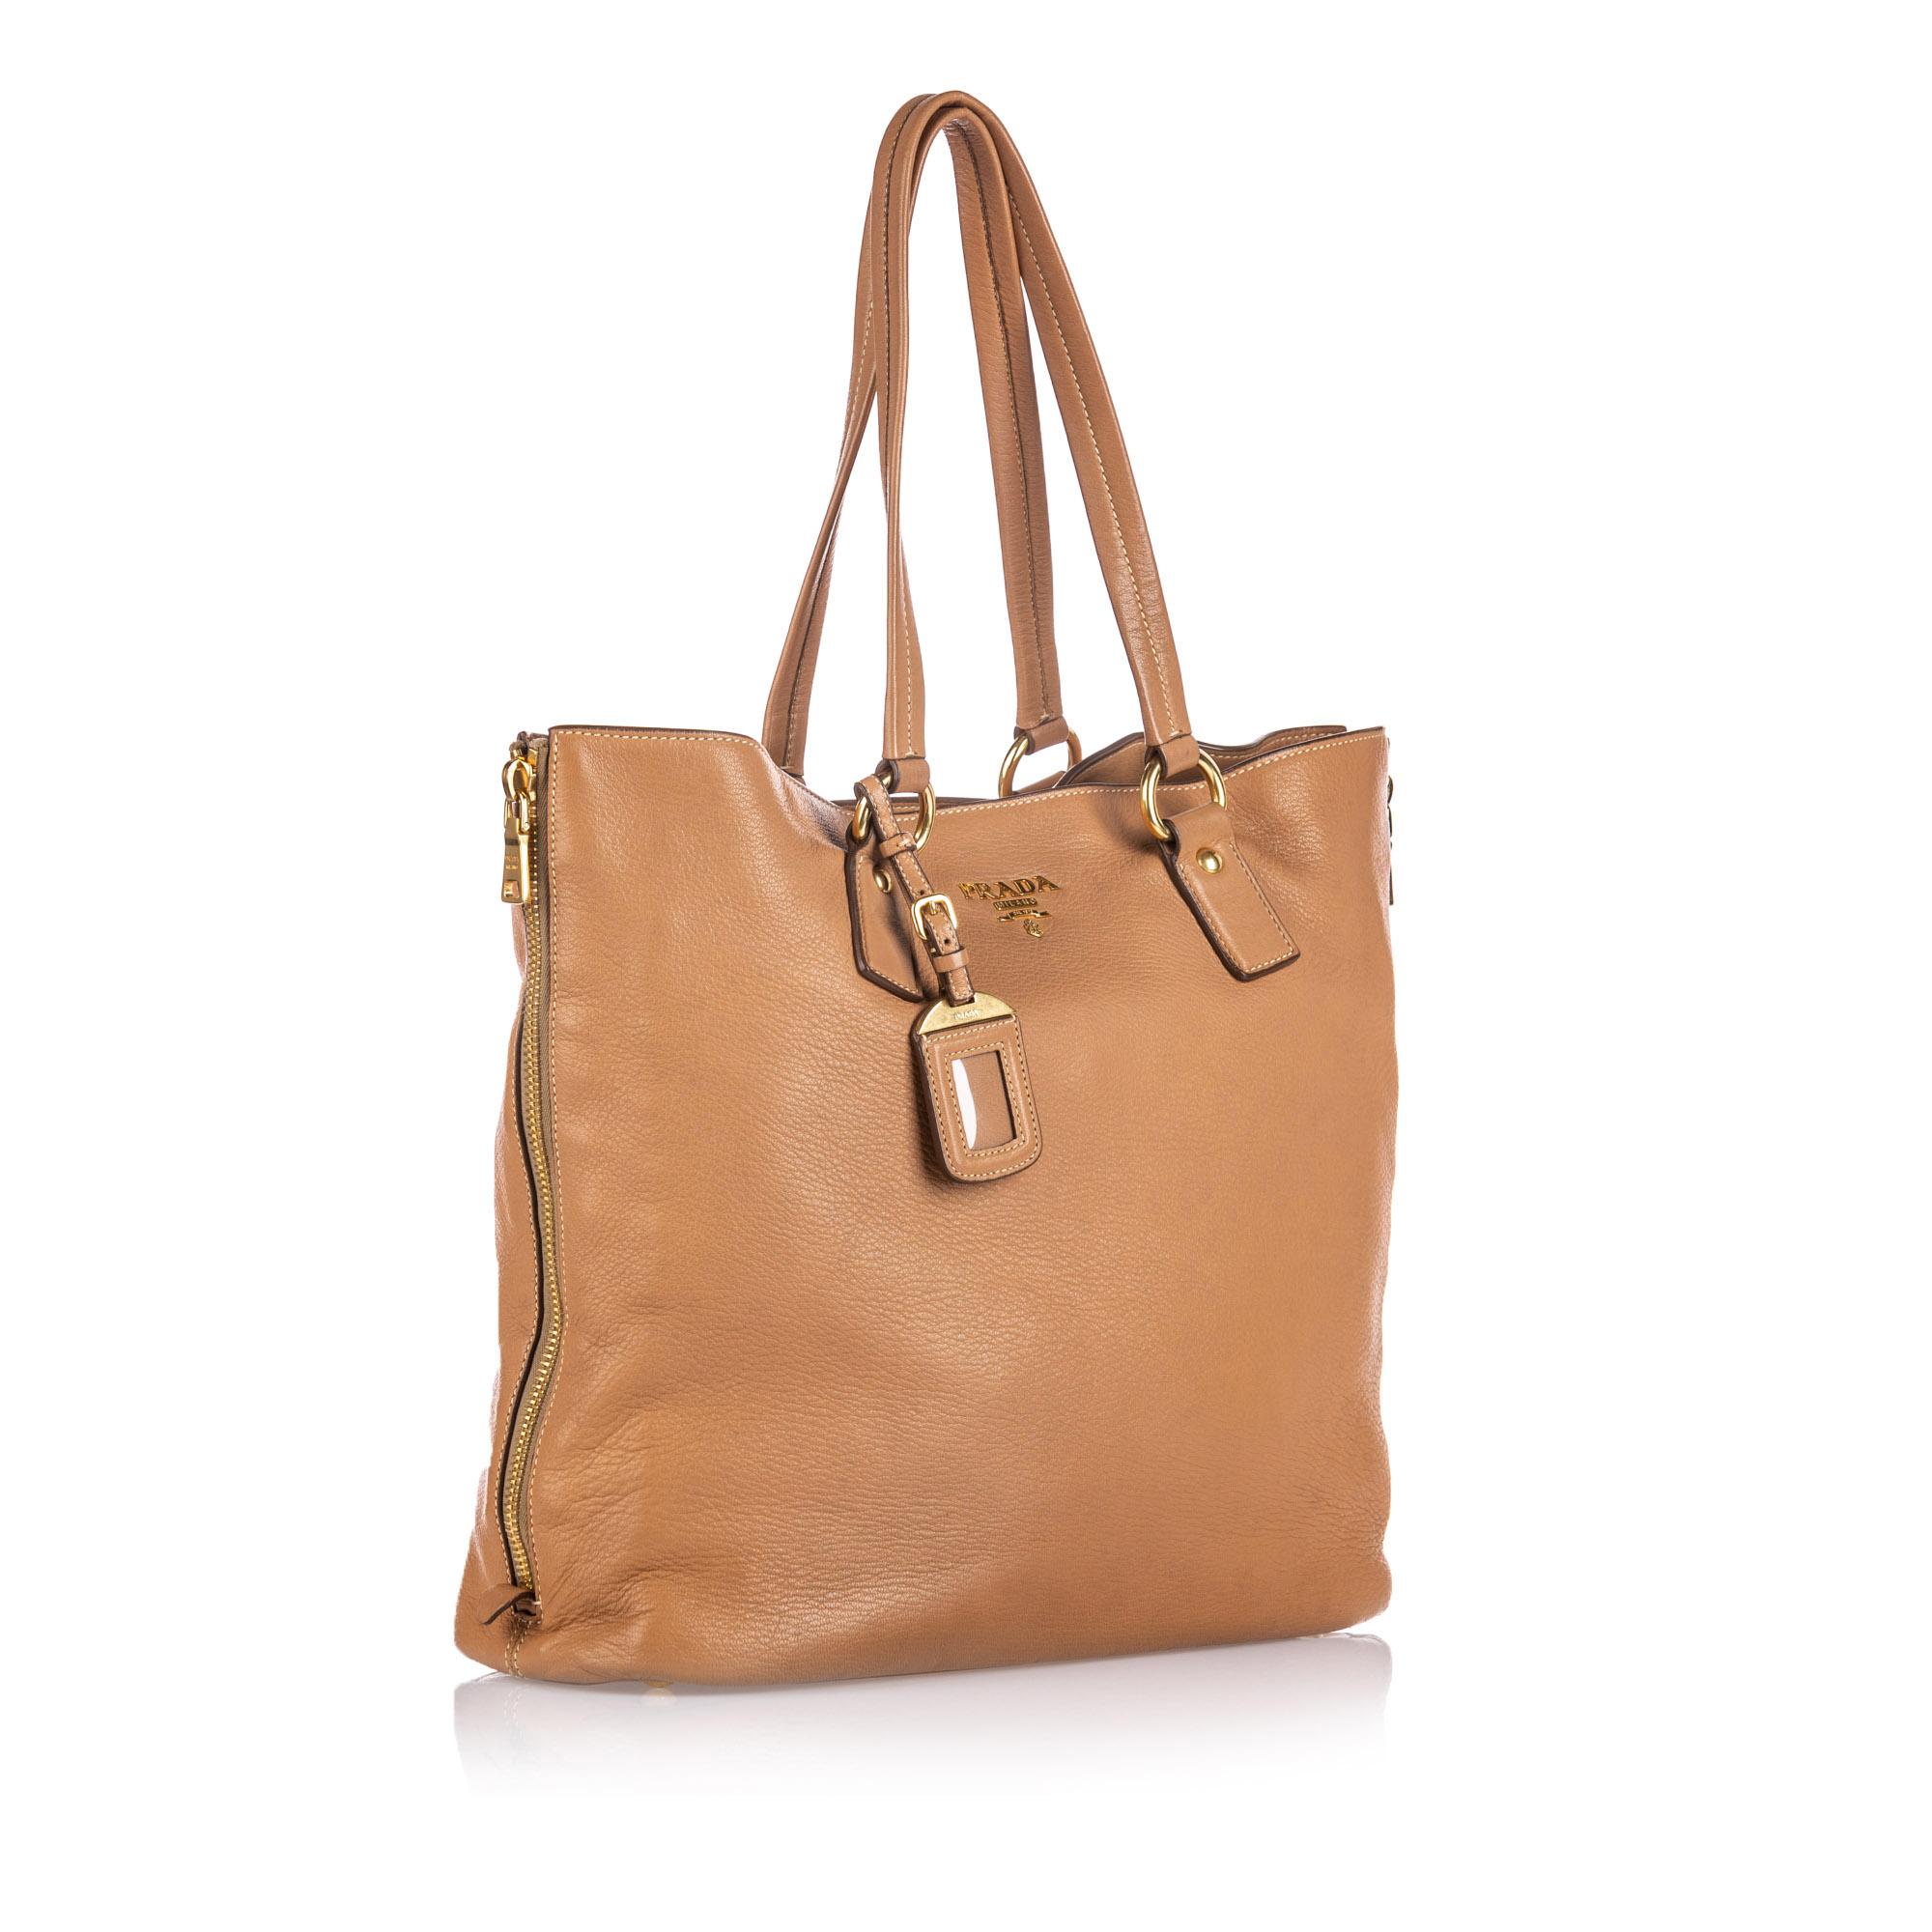 This tote bag features a leather body, flat leather handles, an open top with a magnetic snap button closure, and interior zip and slip pockets. It carries as AB condition rating.

Inclusions: 
This item does not come with